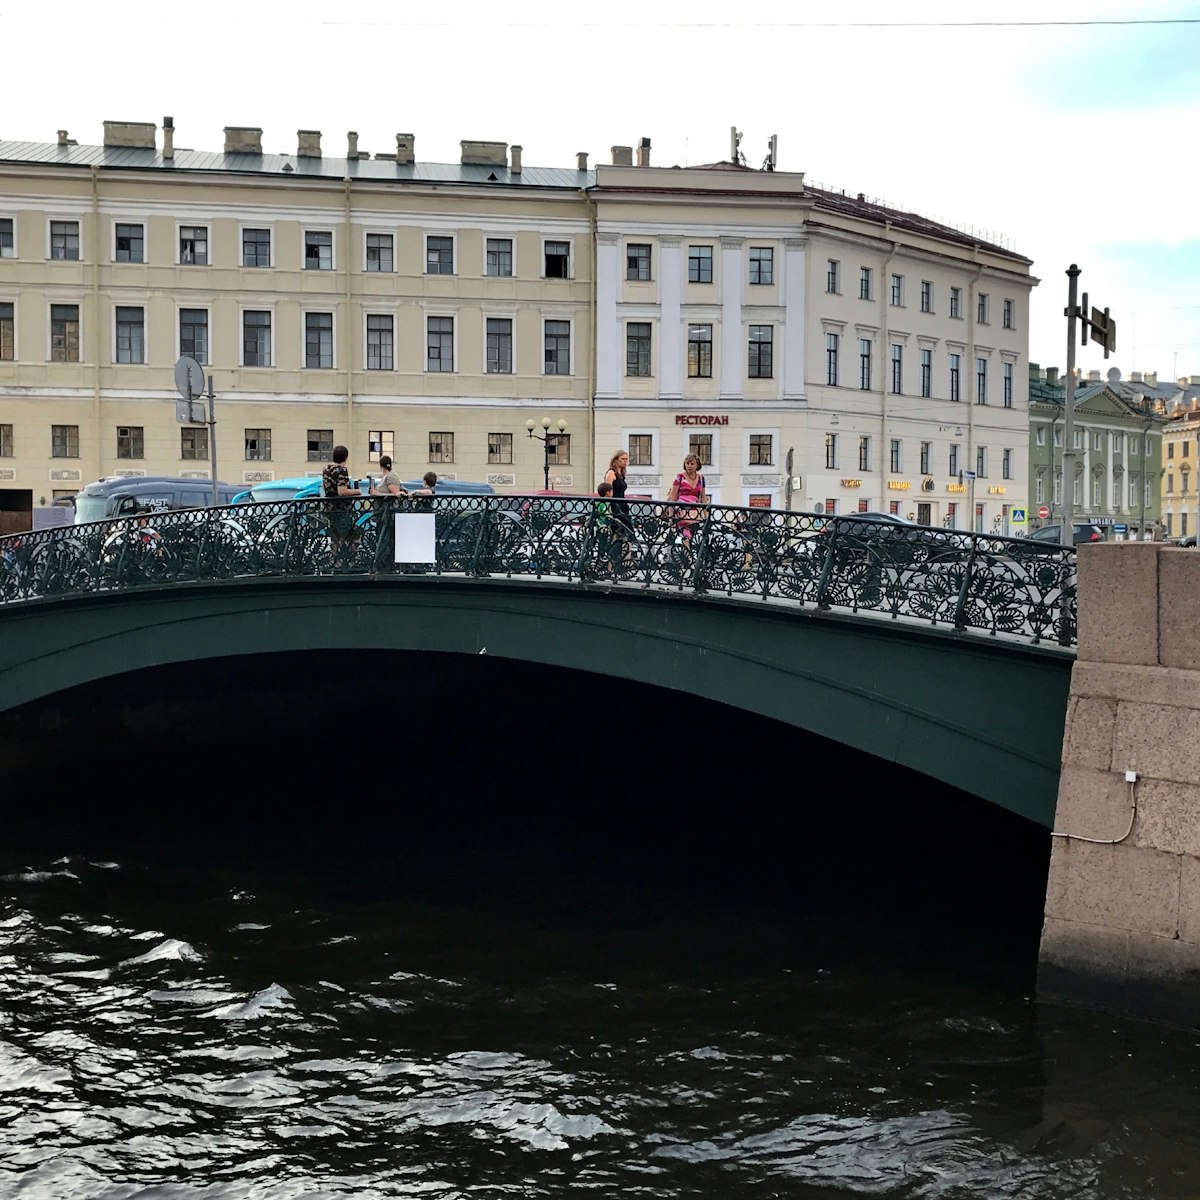 The 'Singers' Bridge' on the Moika River in St Petersburg.